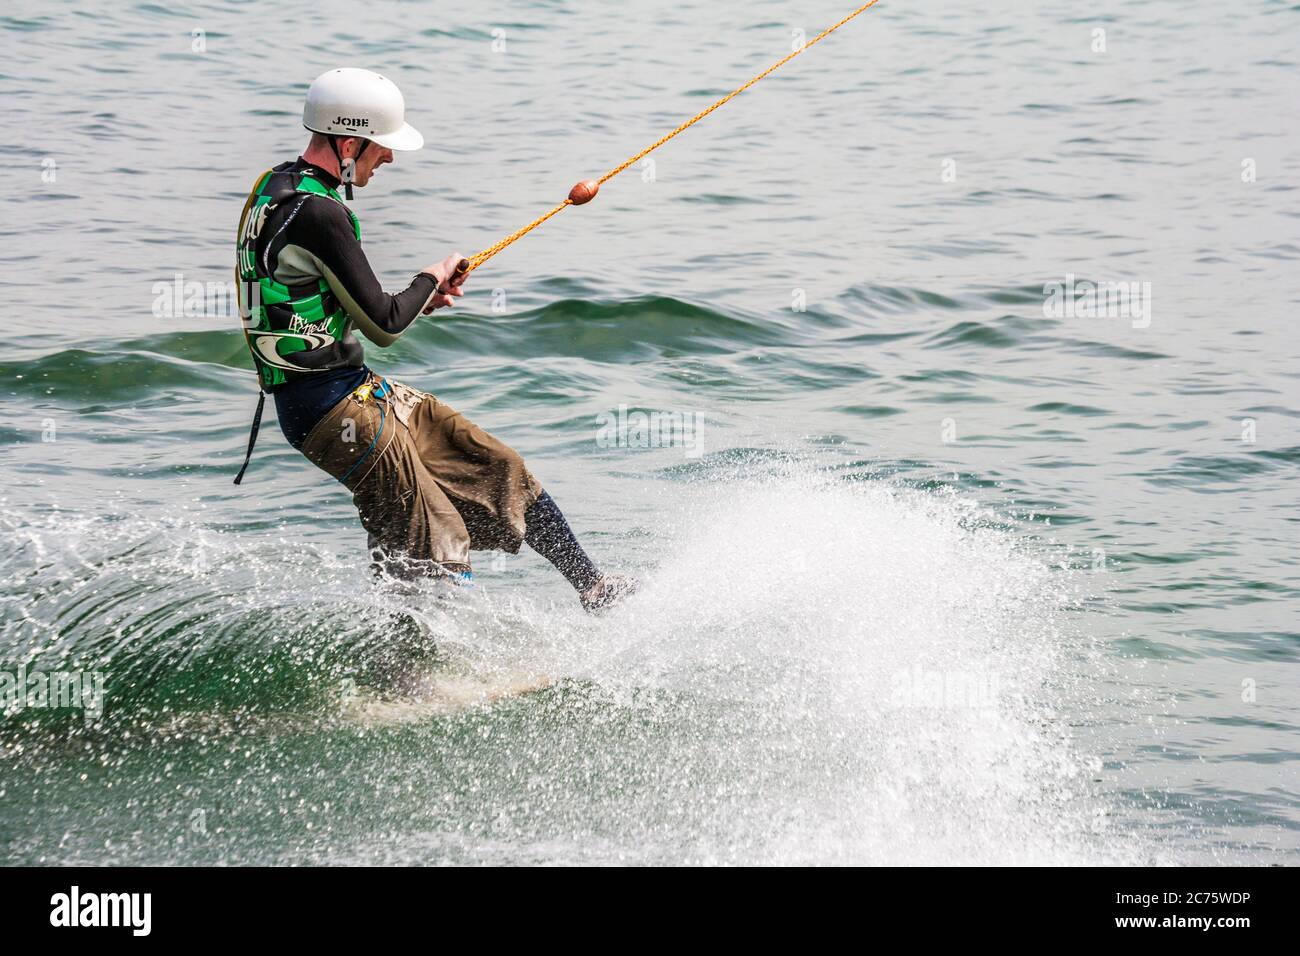 A water skier on one of the lakes at Cotswold Water Park. Stock Photo